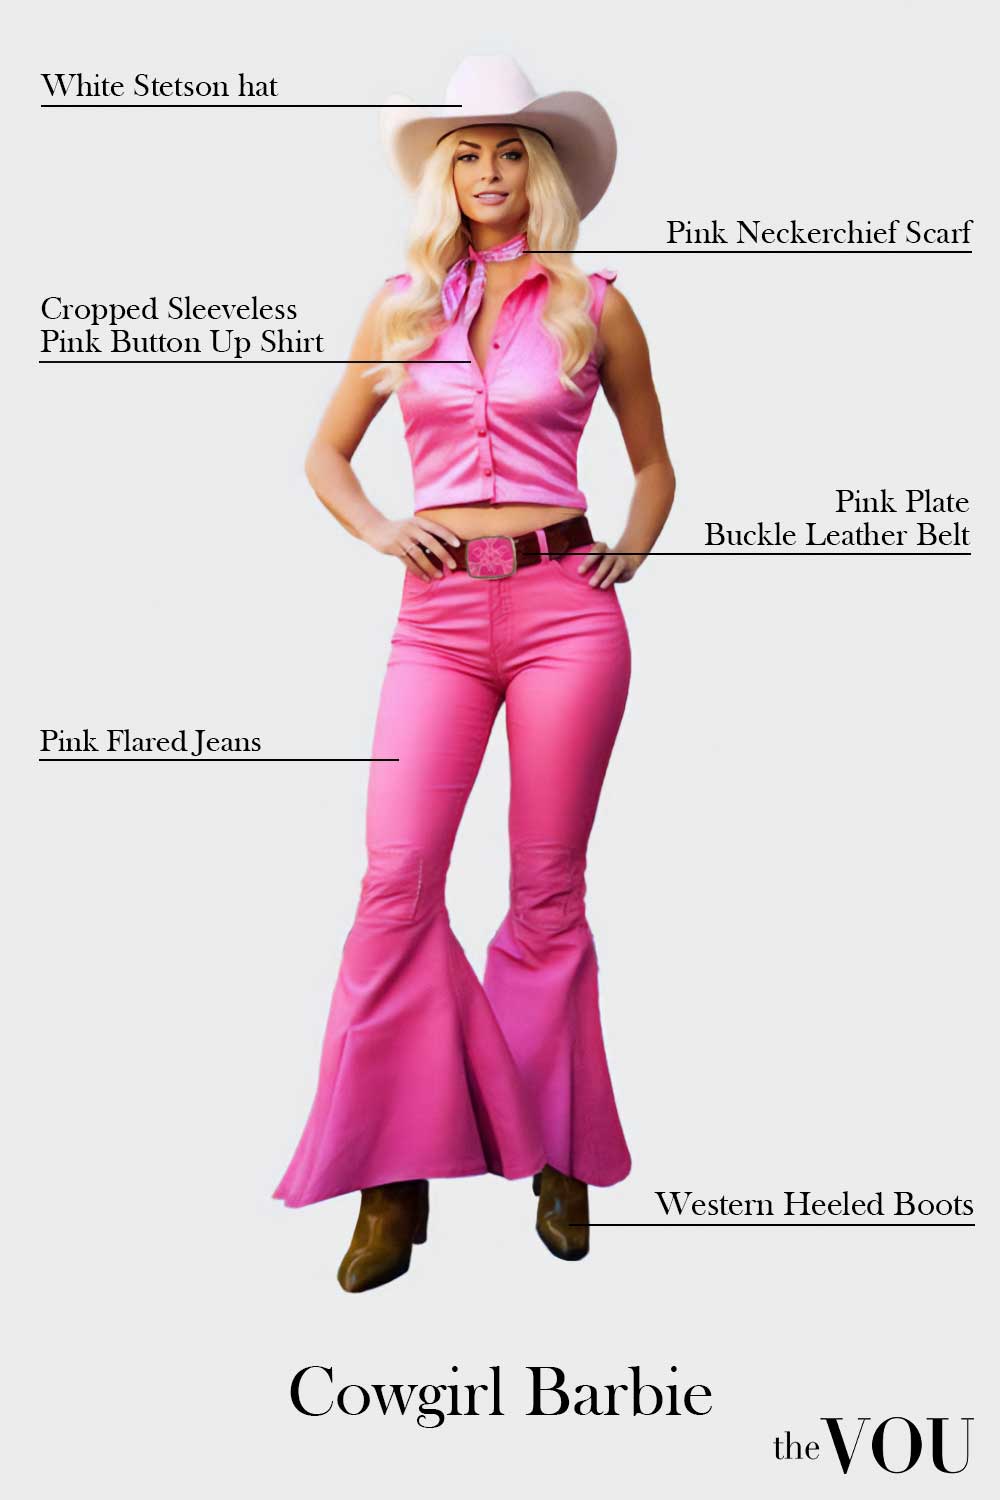 Cowgirl Barbie outfit